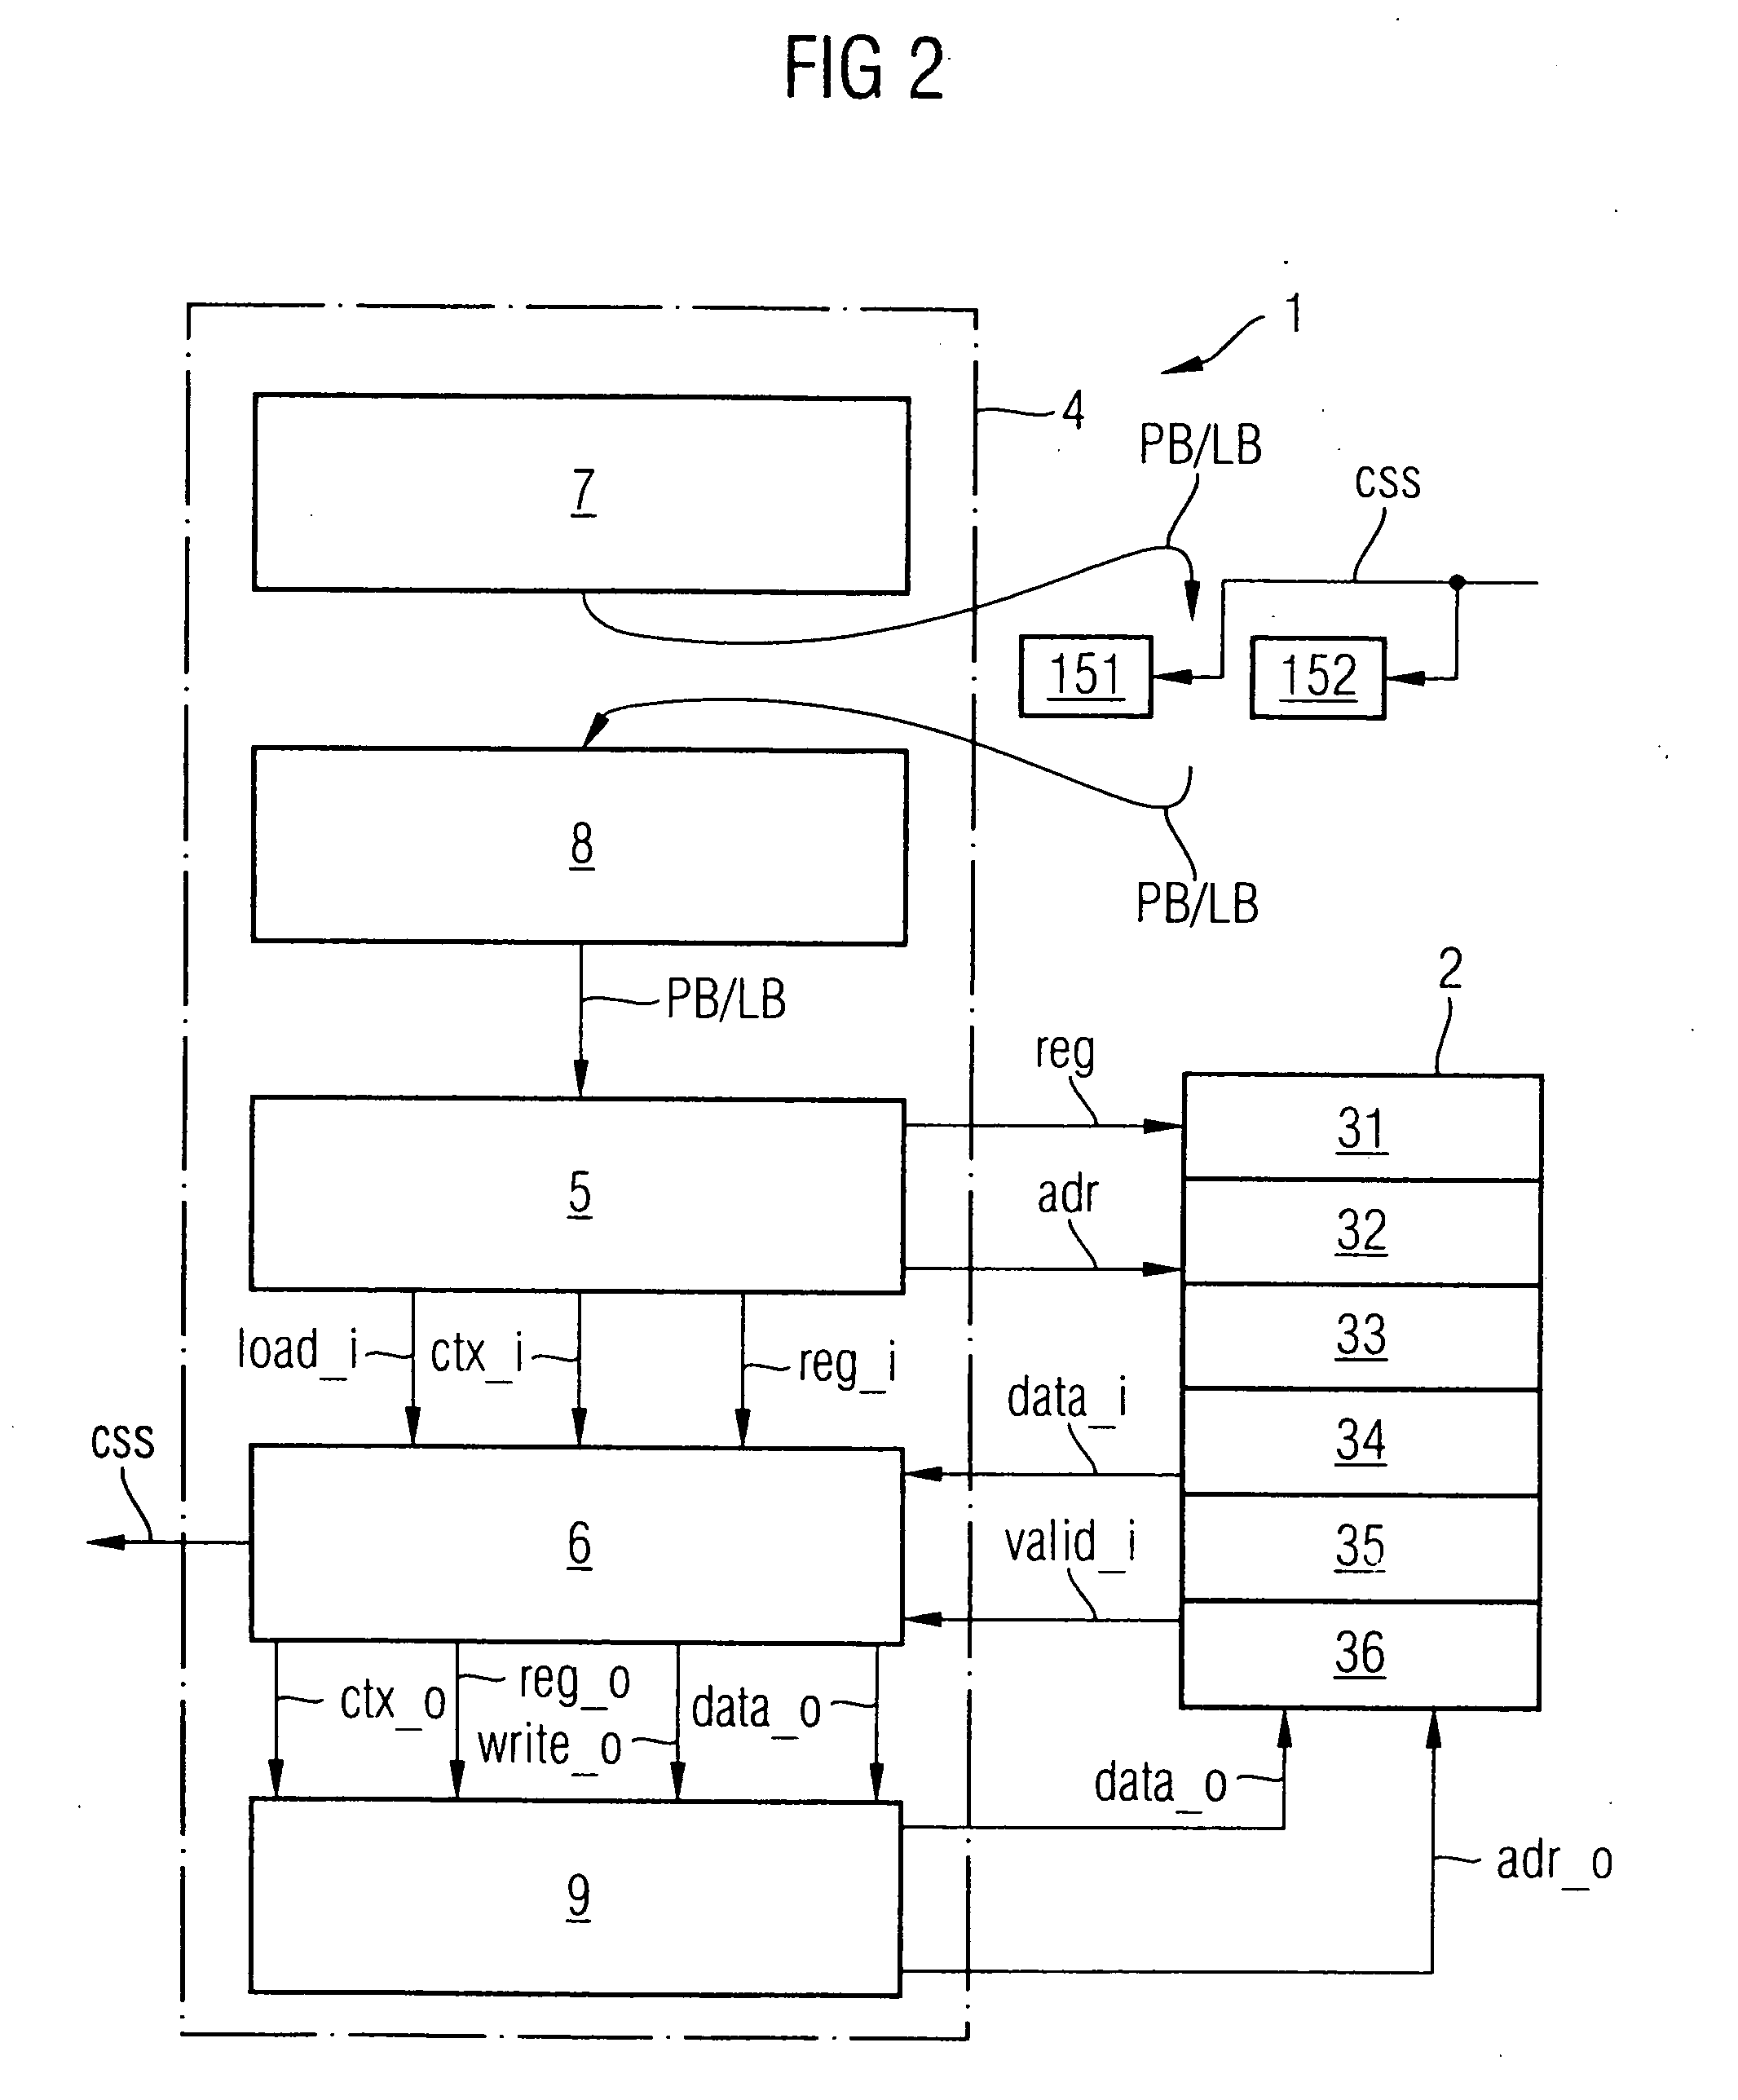 Multi-thread processor and method for operating such a processor